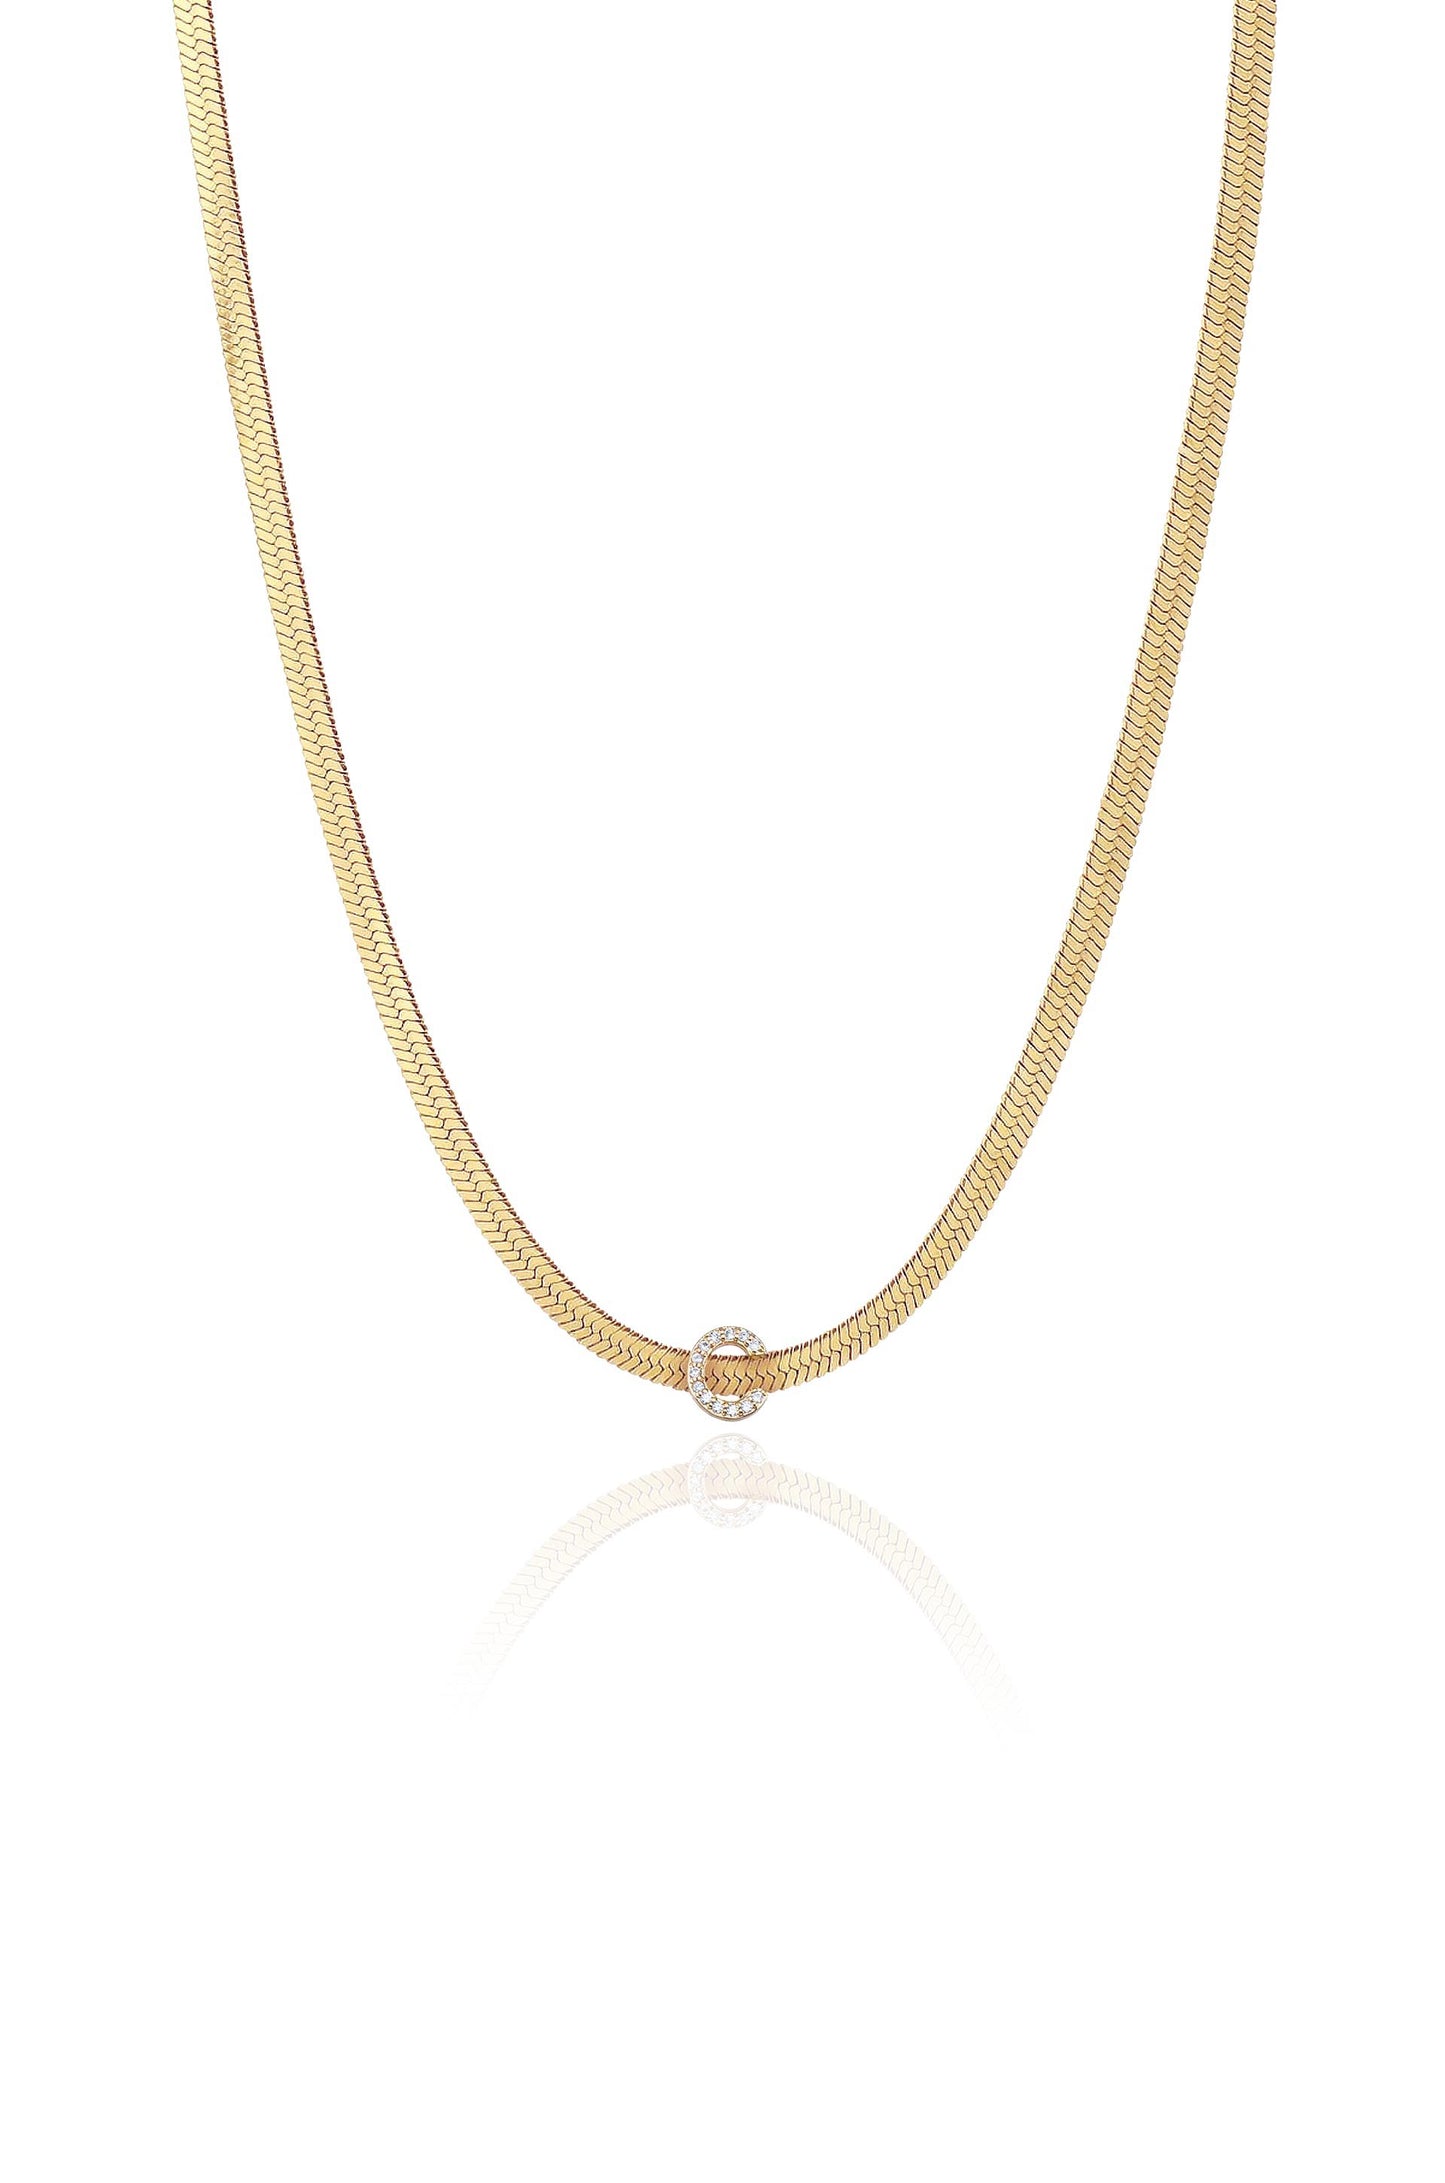 Initial Herringbone 18k Gold Plated Necklace - C